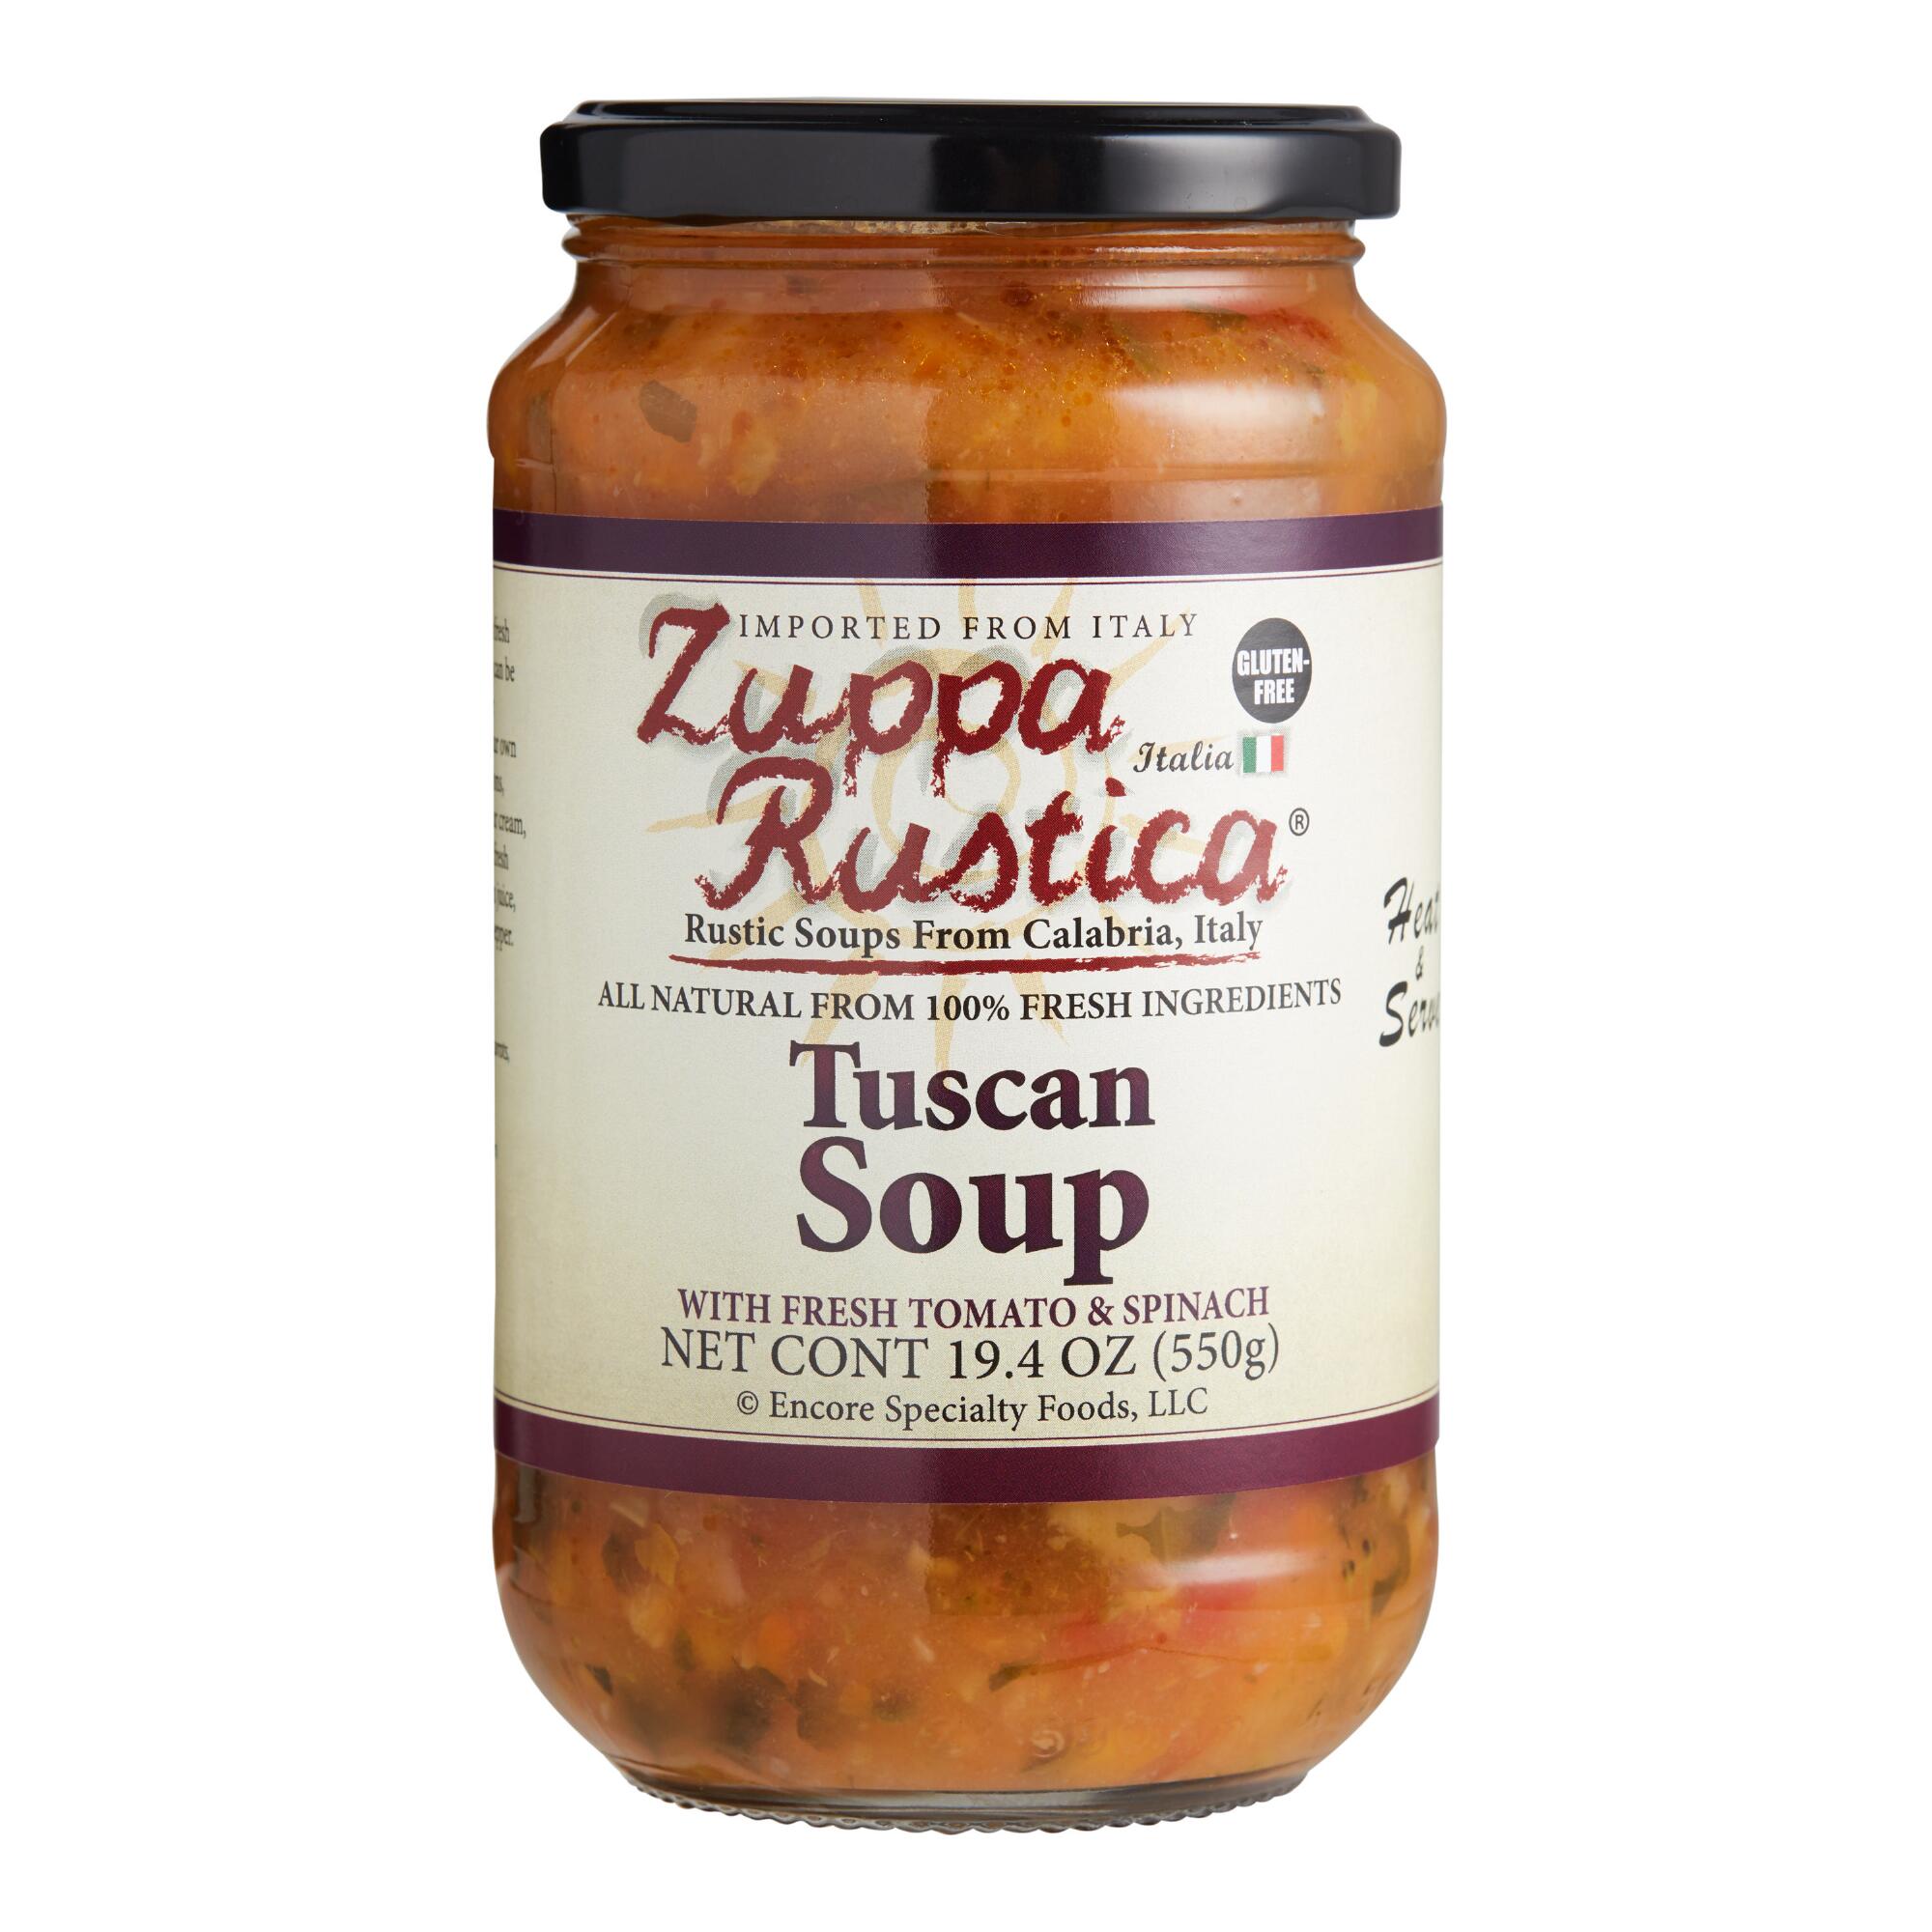 Zuppa Rustica Tuscan Soup by World Market